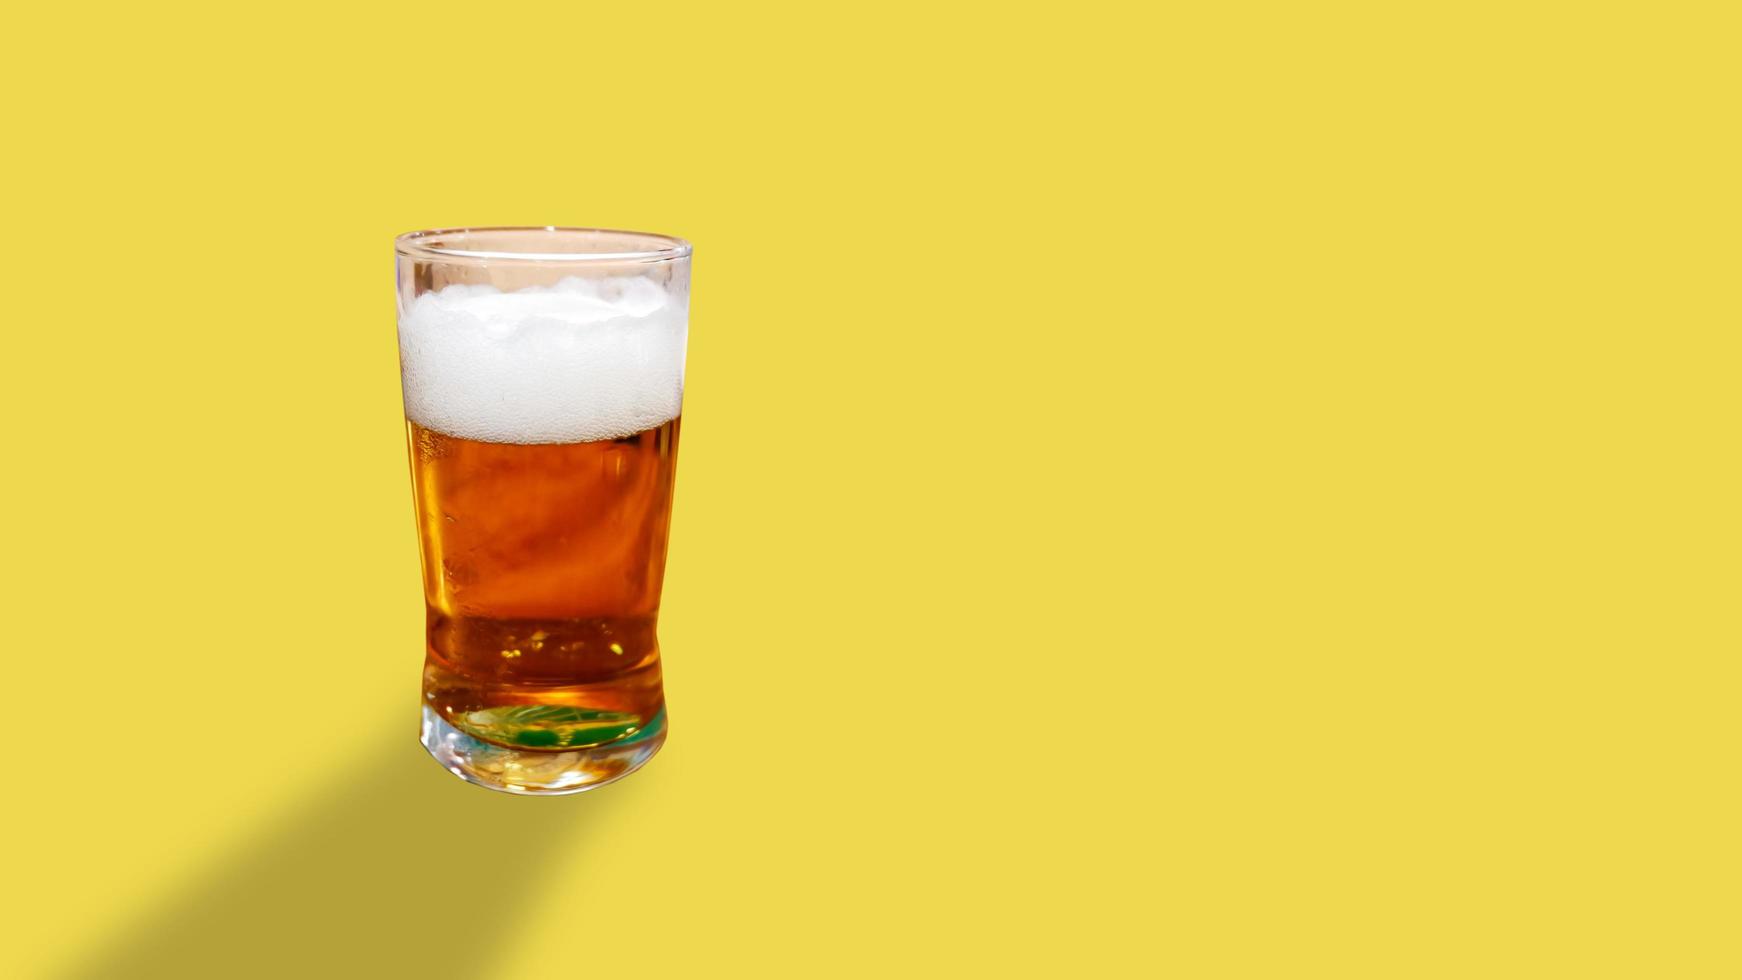 Beer glass on a yellow background. photo